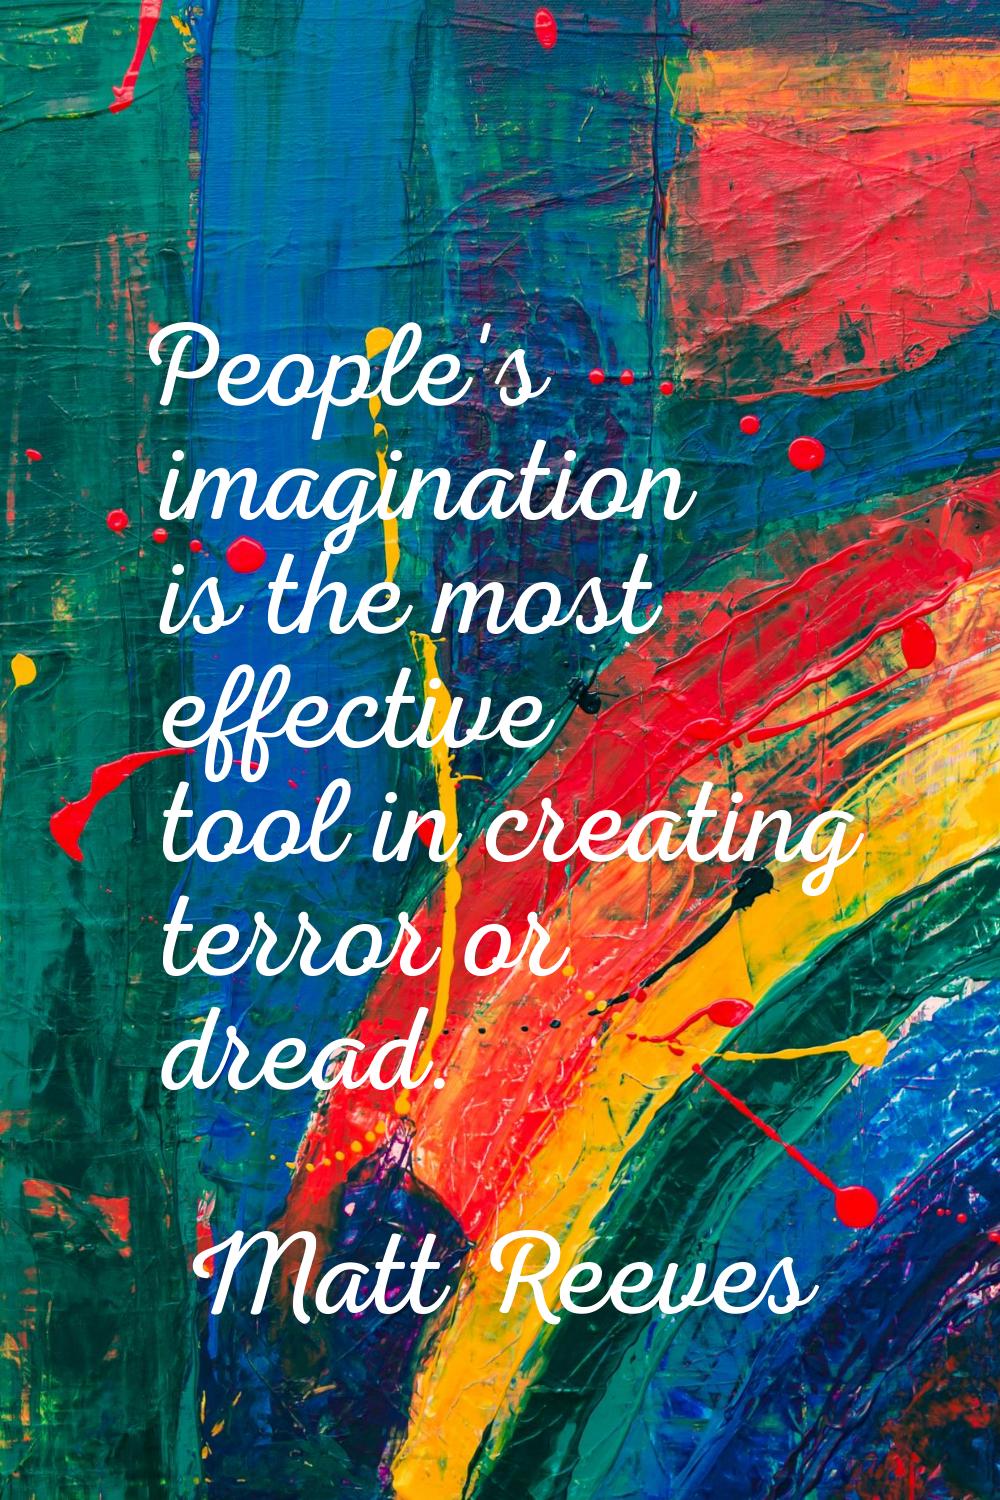 People's imagination is the most effective tool in creating terror or dread.